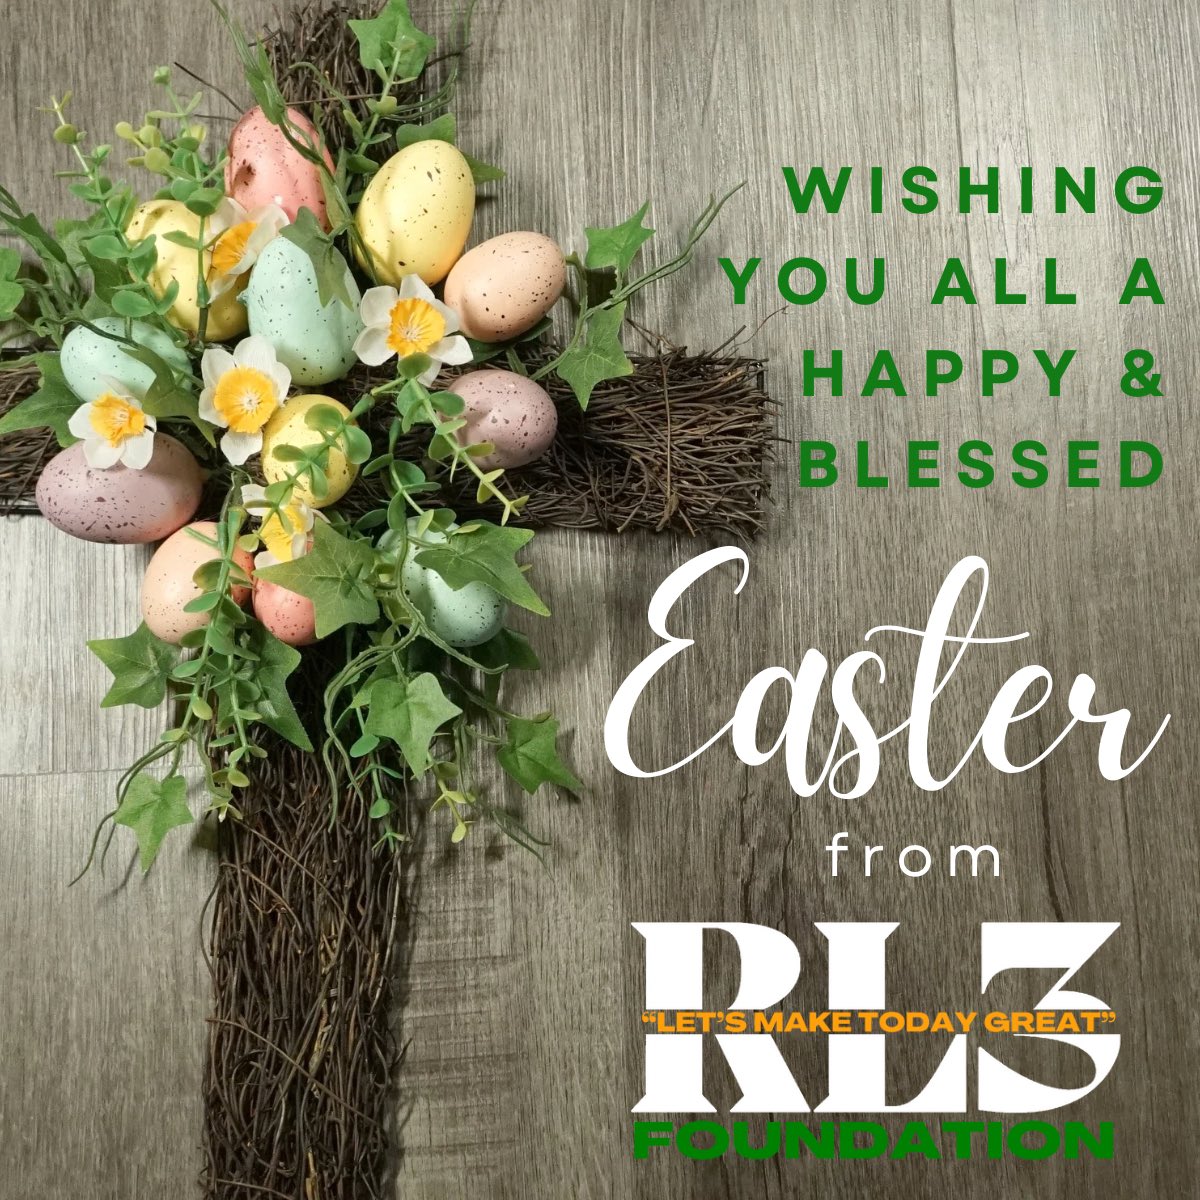 We would like to wish everyone a happy and blessed Easter! 💚🧡